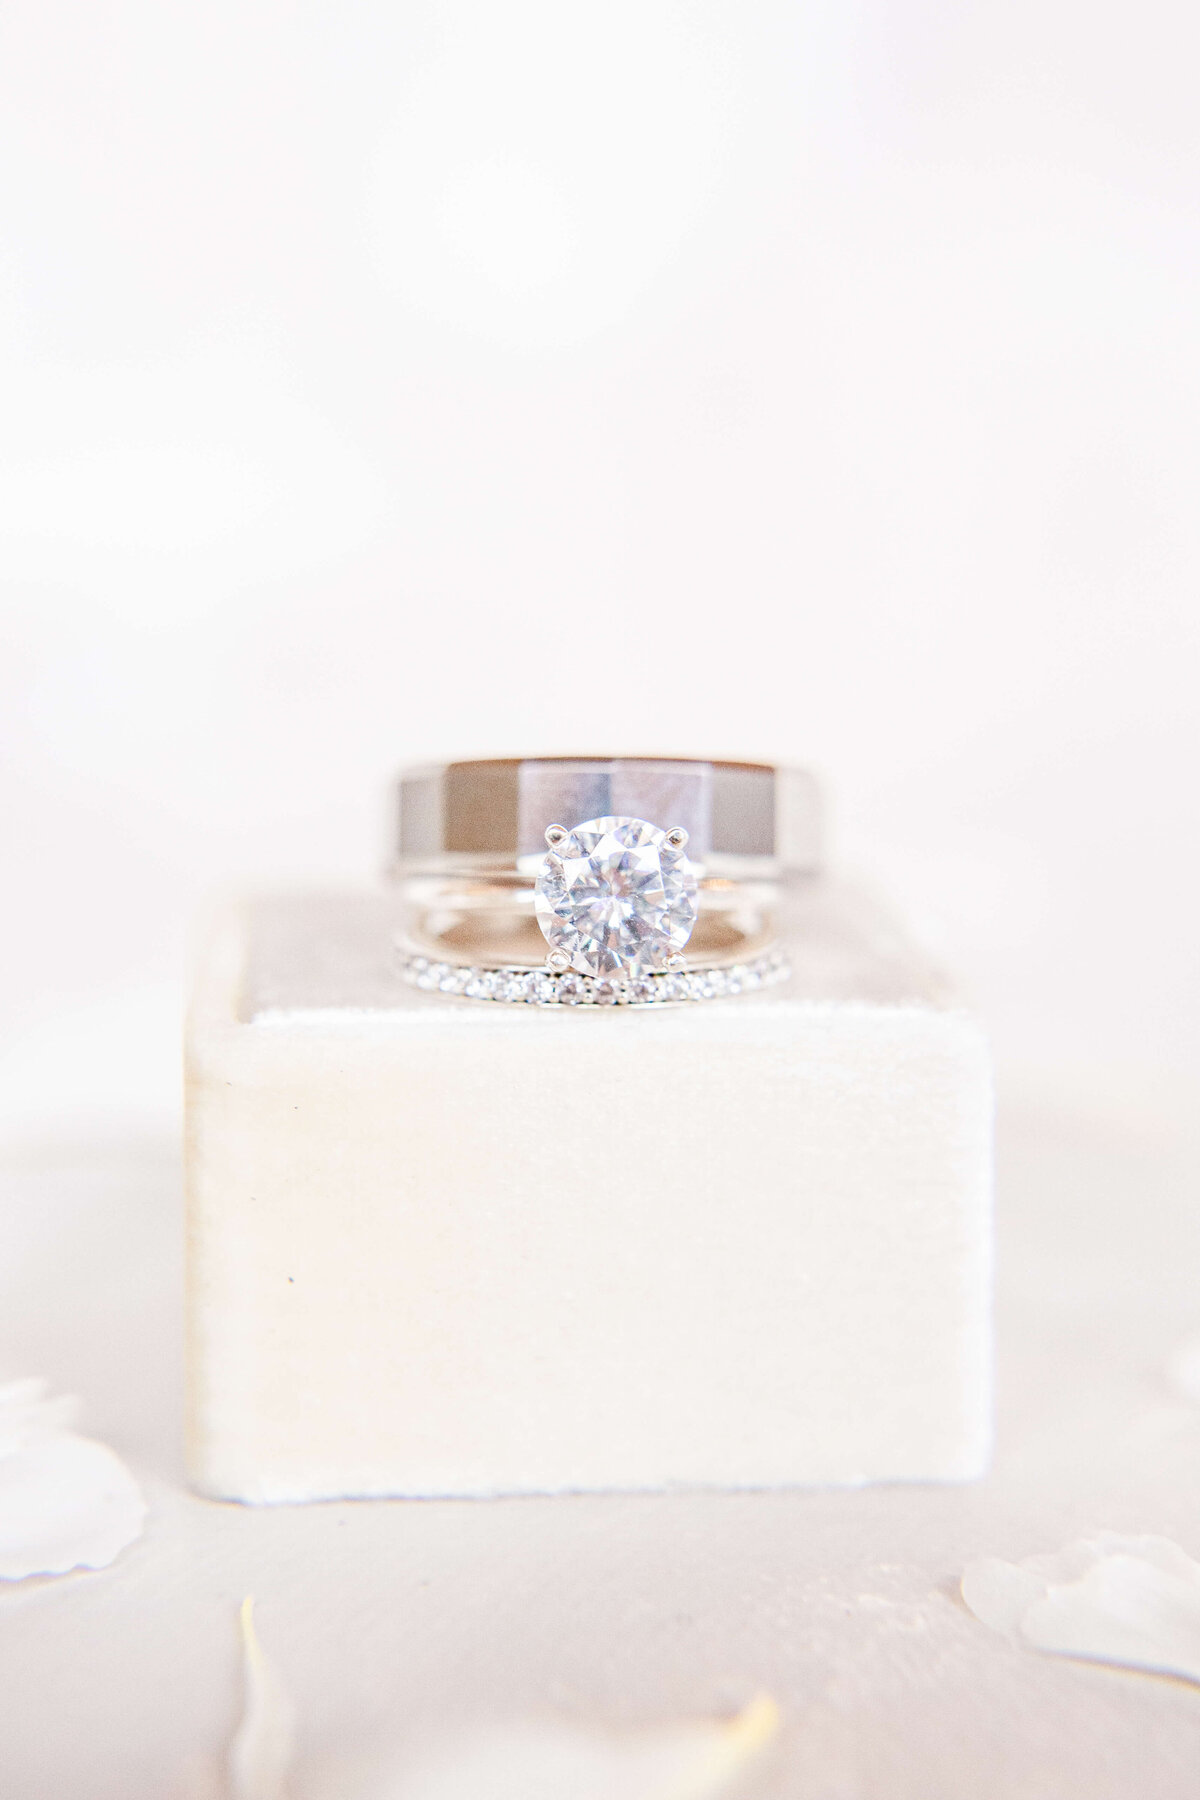 Wedding-engagement-rings-detail-shot-by-Bethany-Lane-Photography-1